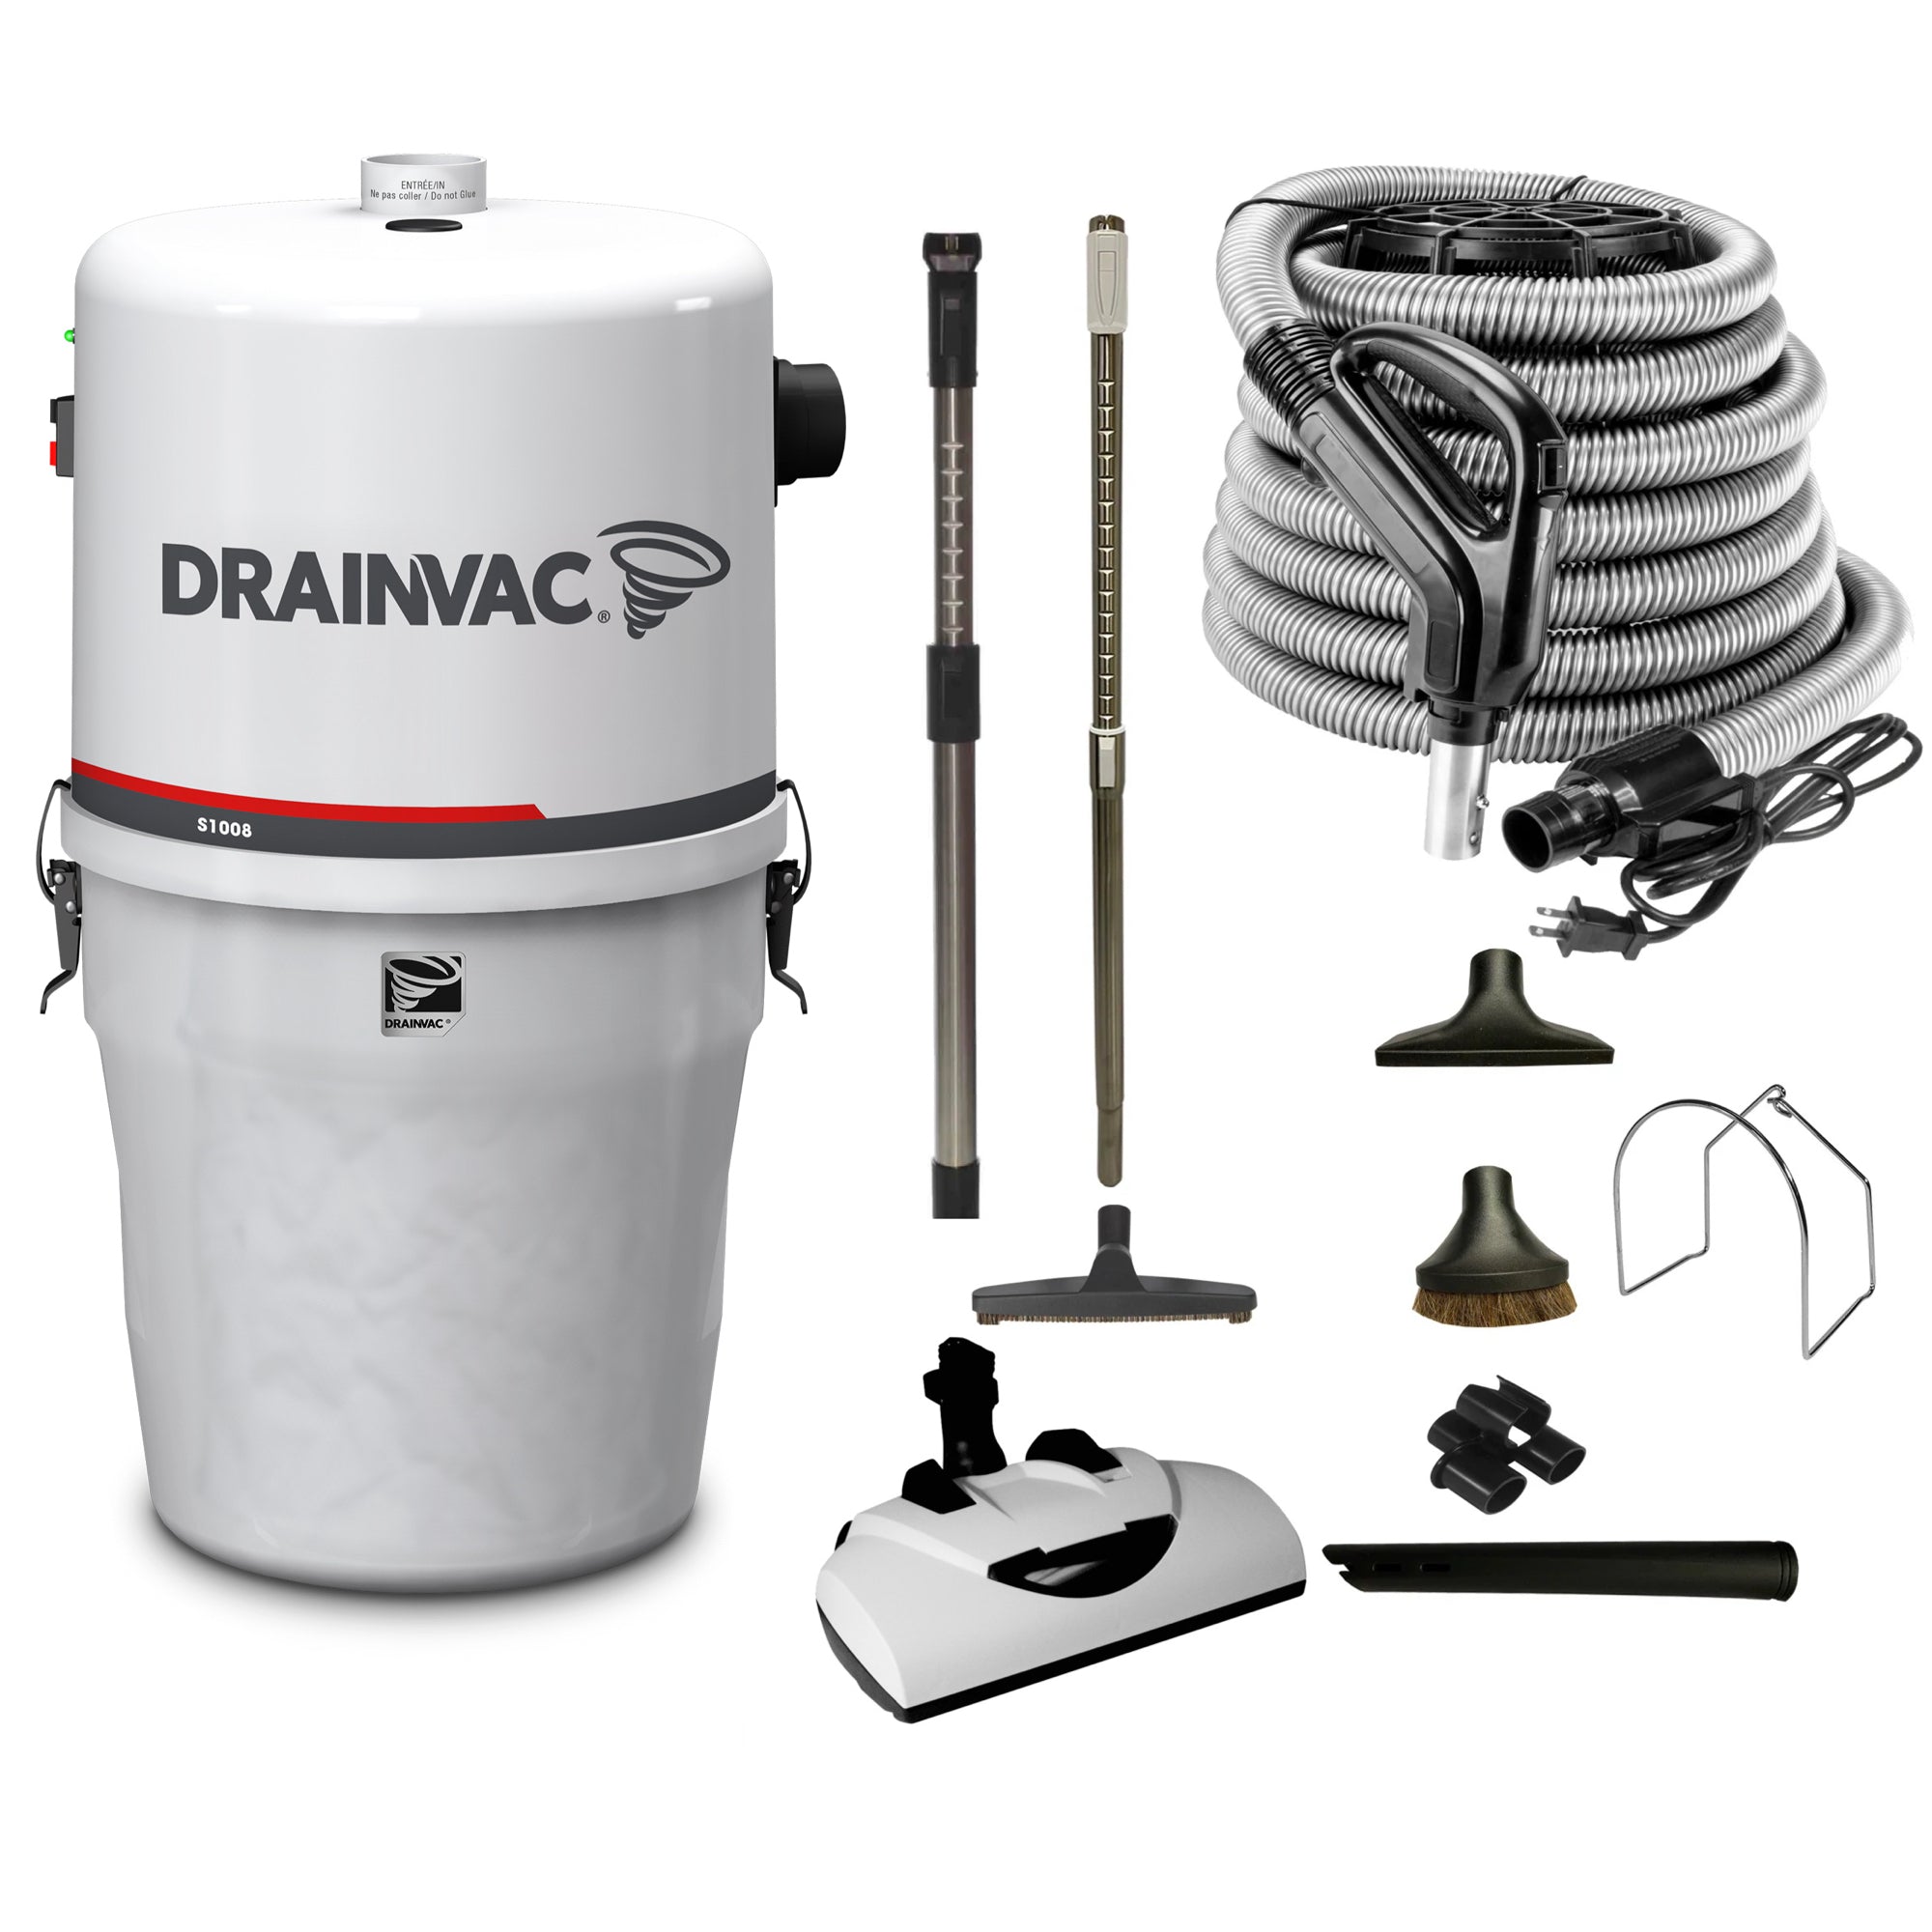 DrainVac S1008 Central Vacuum with Wessel Werk EBK360 Electric Package